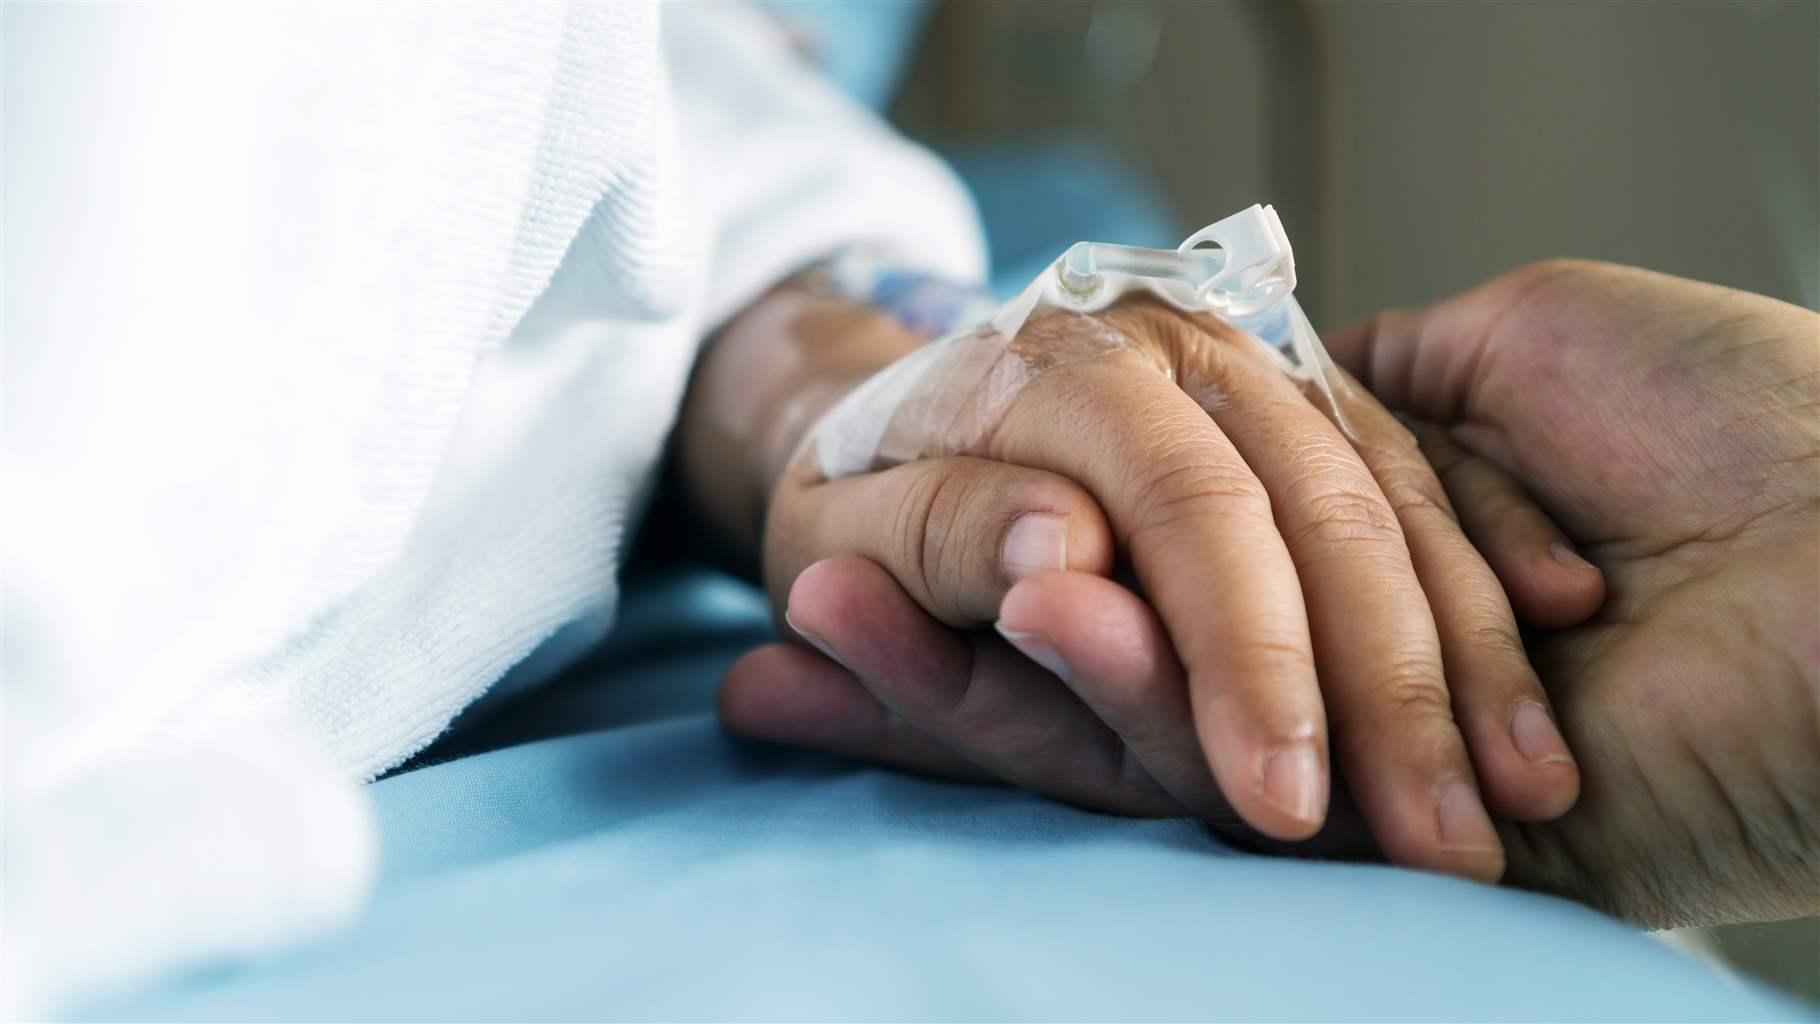 Holding hands in hospital bed